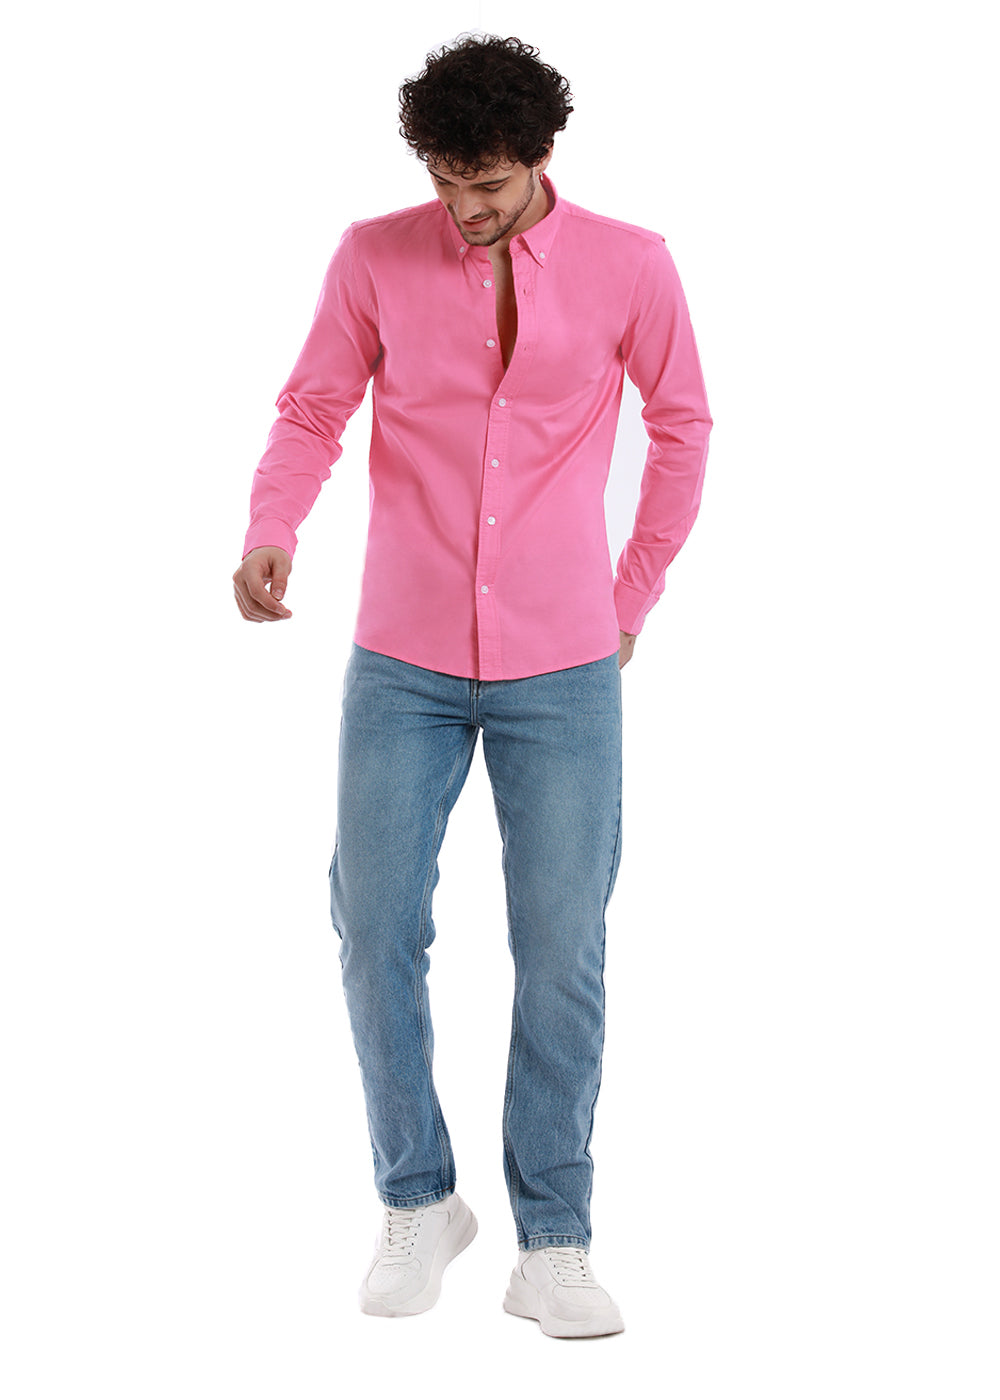 Style Knockout Pink Oxford Shirt